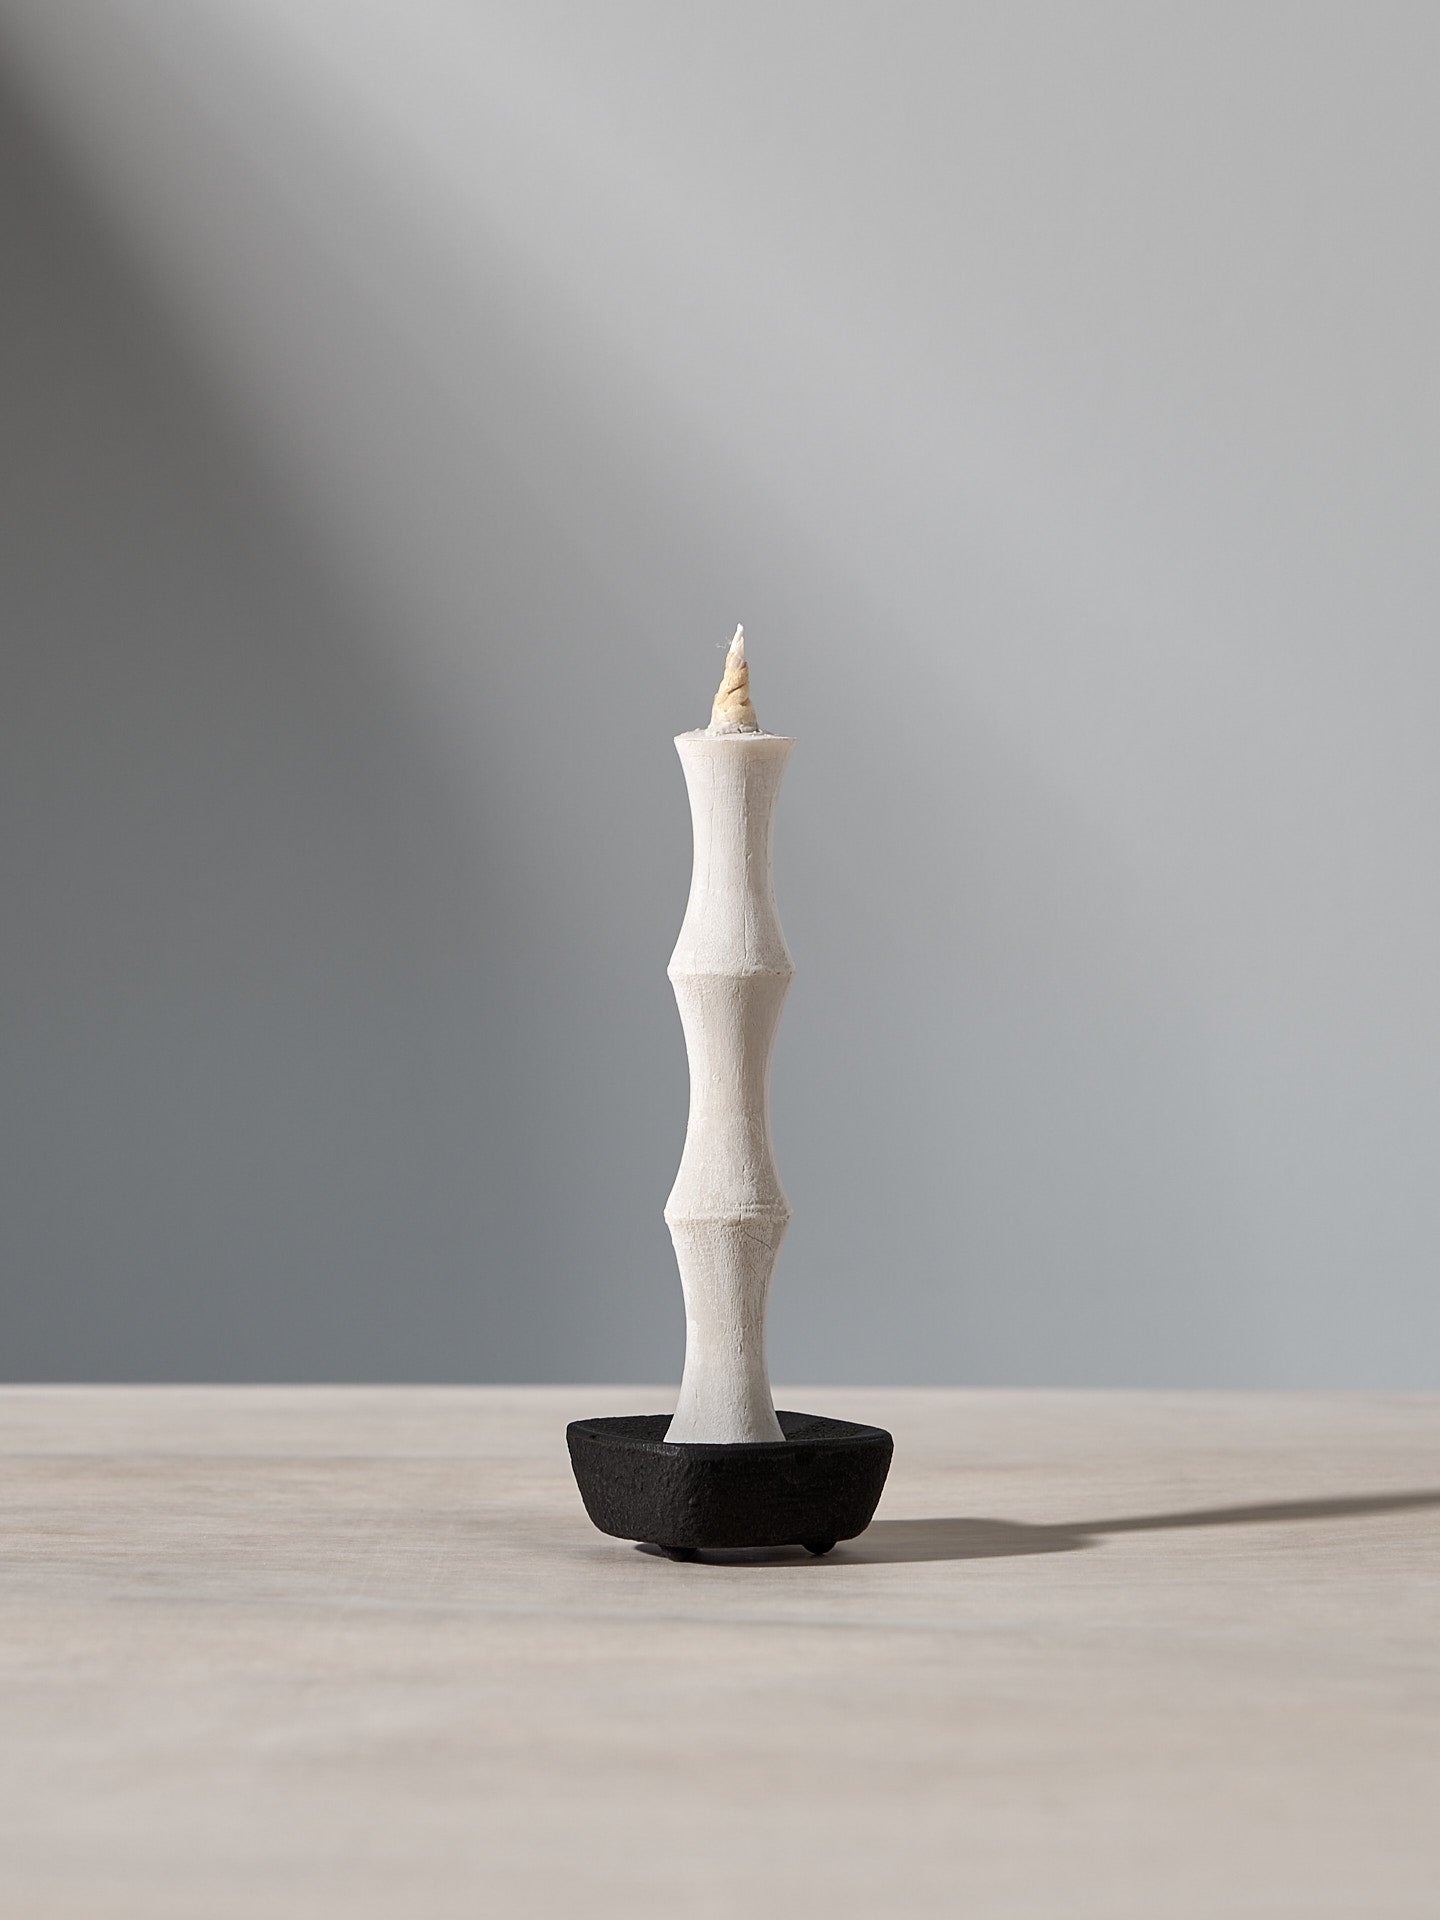 A NANAO-N candle sitting on top of a Takazawa wooden table.